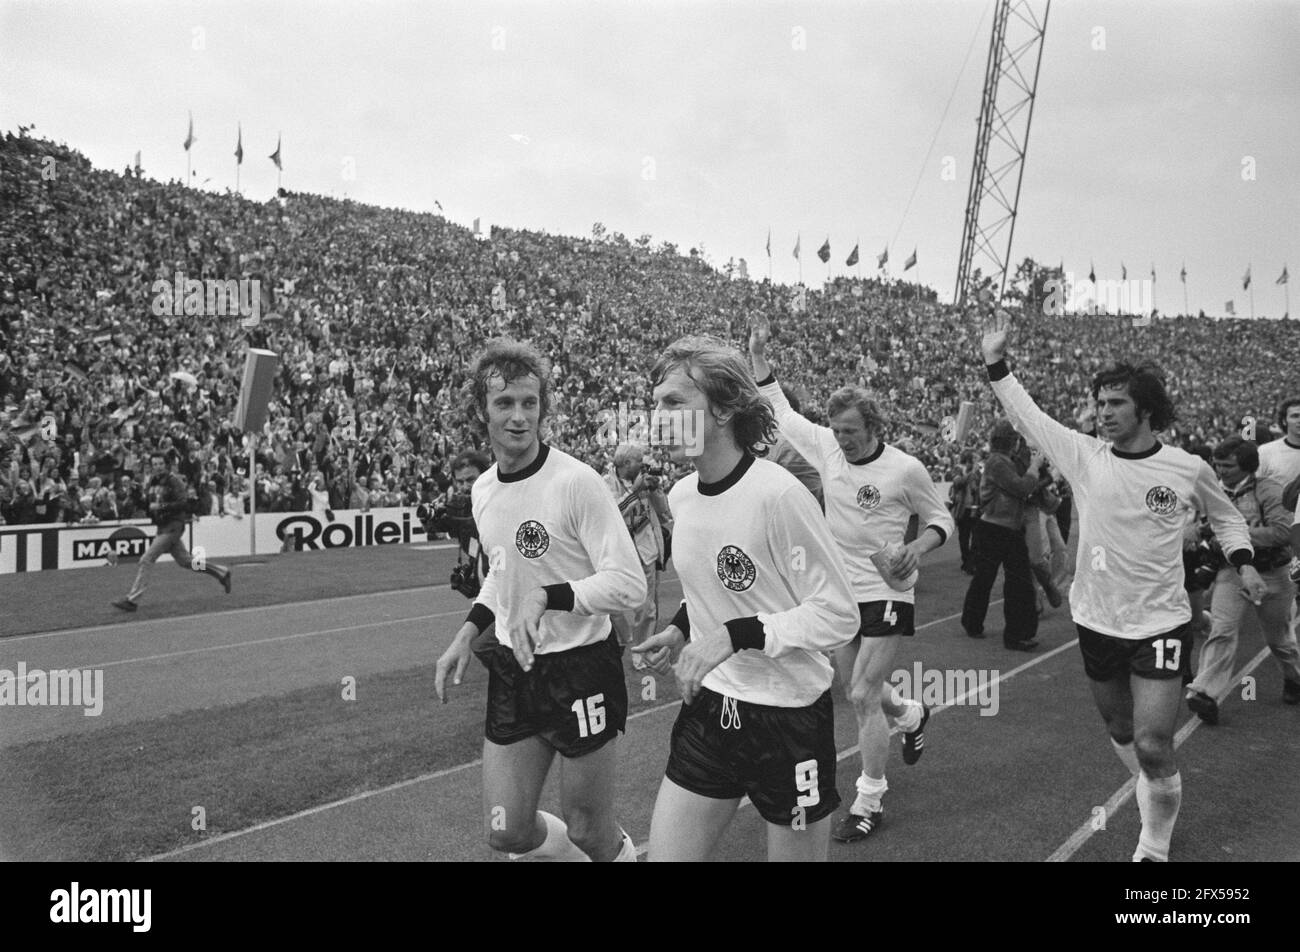 World Cup final 1974 in Munich, West Germany against the Netherlands 2-1; From left to right: Bonhoff, Grabowski, Schwarzenbeck and Müller, July 7, 1974, sports, soccer, The Netherlands, 20th century press agency photo, news to remember, documentary, historic photography 1945-1990, visual stories, human history of the Twentieth Century, capturing moments in time Stock Photo